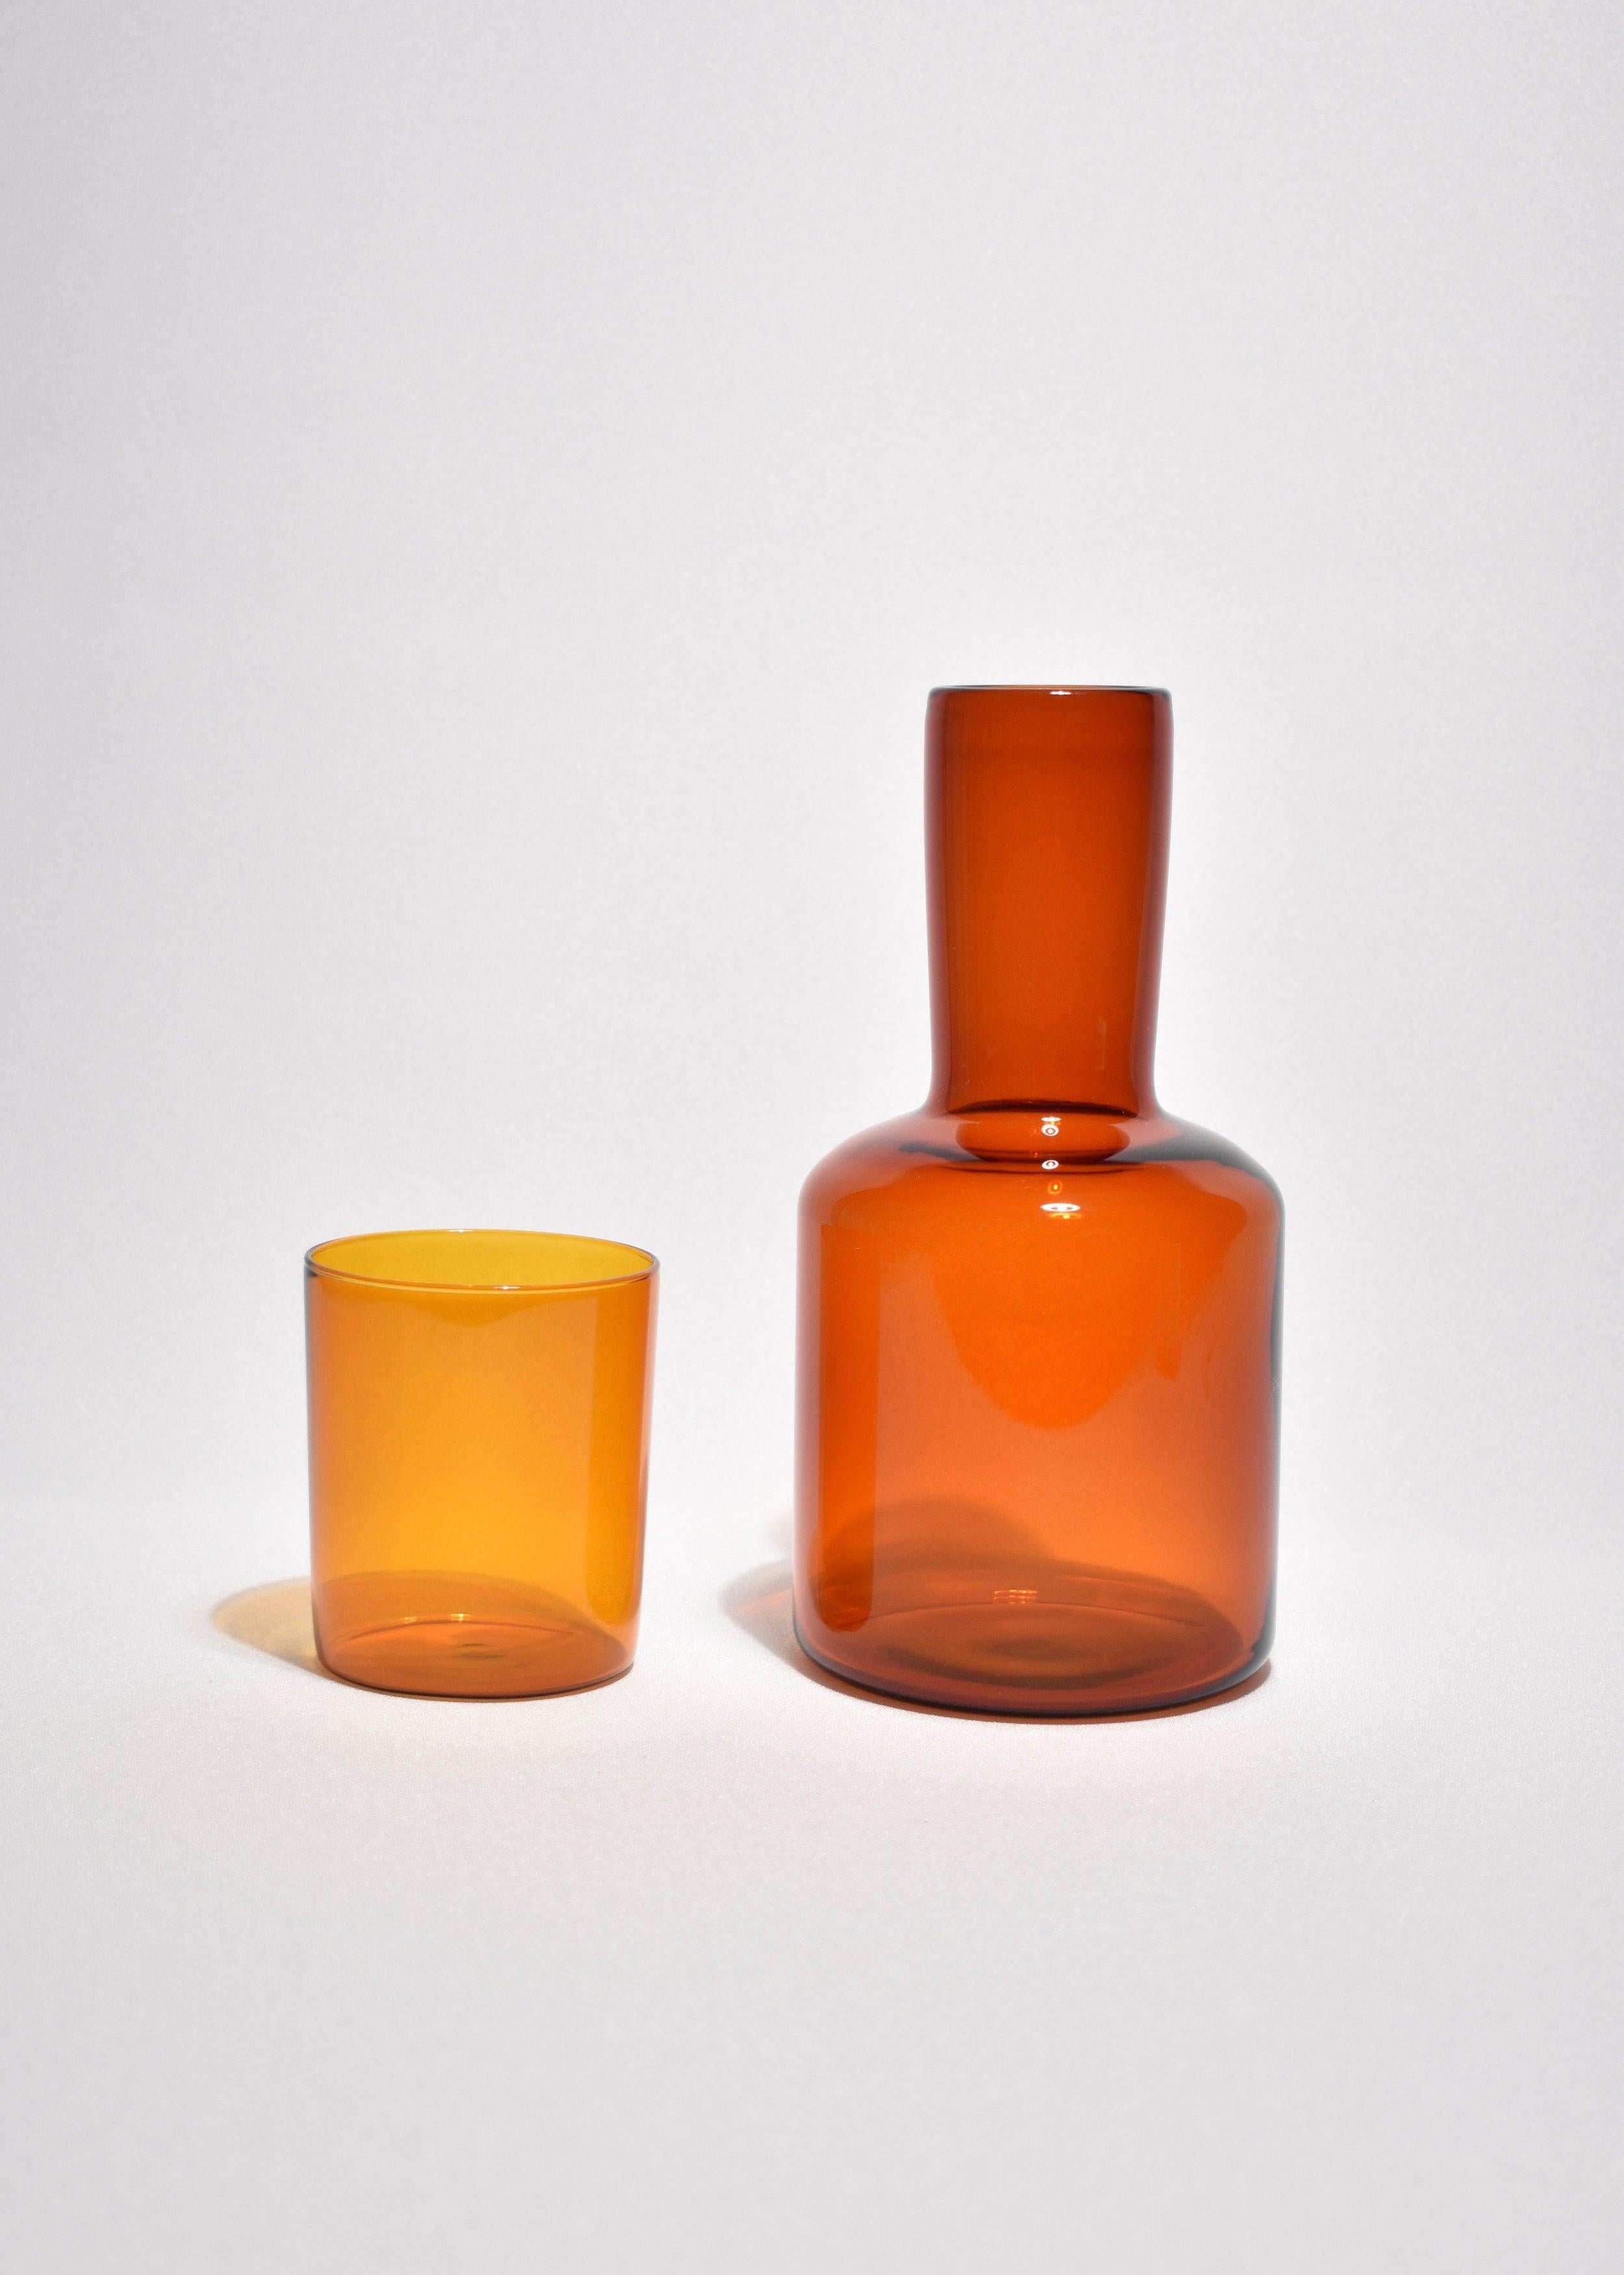 Amber carafe set by Maison Balzac inspired by the traditional sets used in France and displayed on a bedside table at night. 

Food grade colored glass, individually mouth blown. 
Heat and cold resistant.
Hand wash